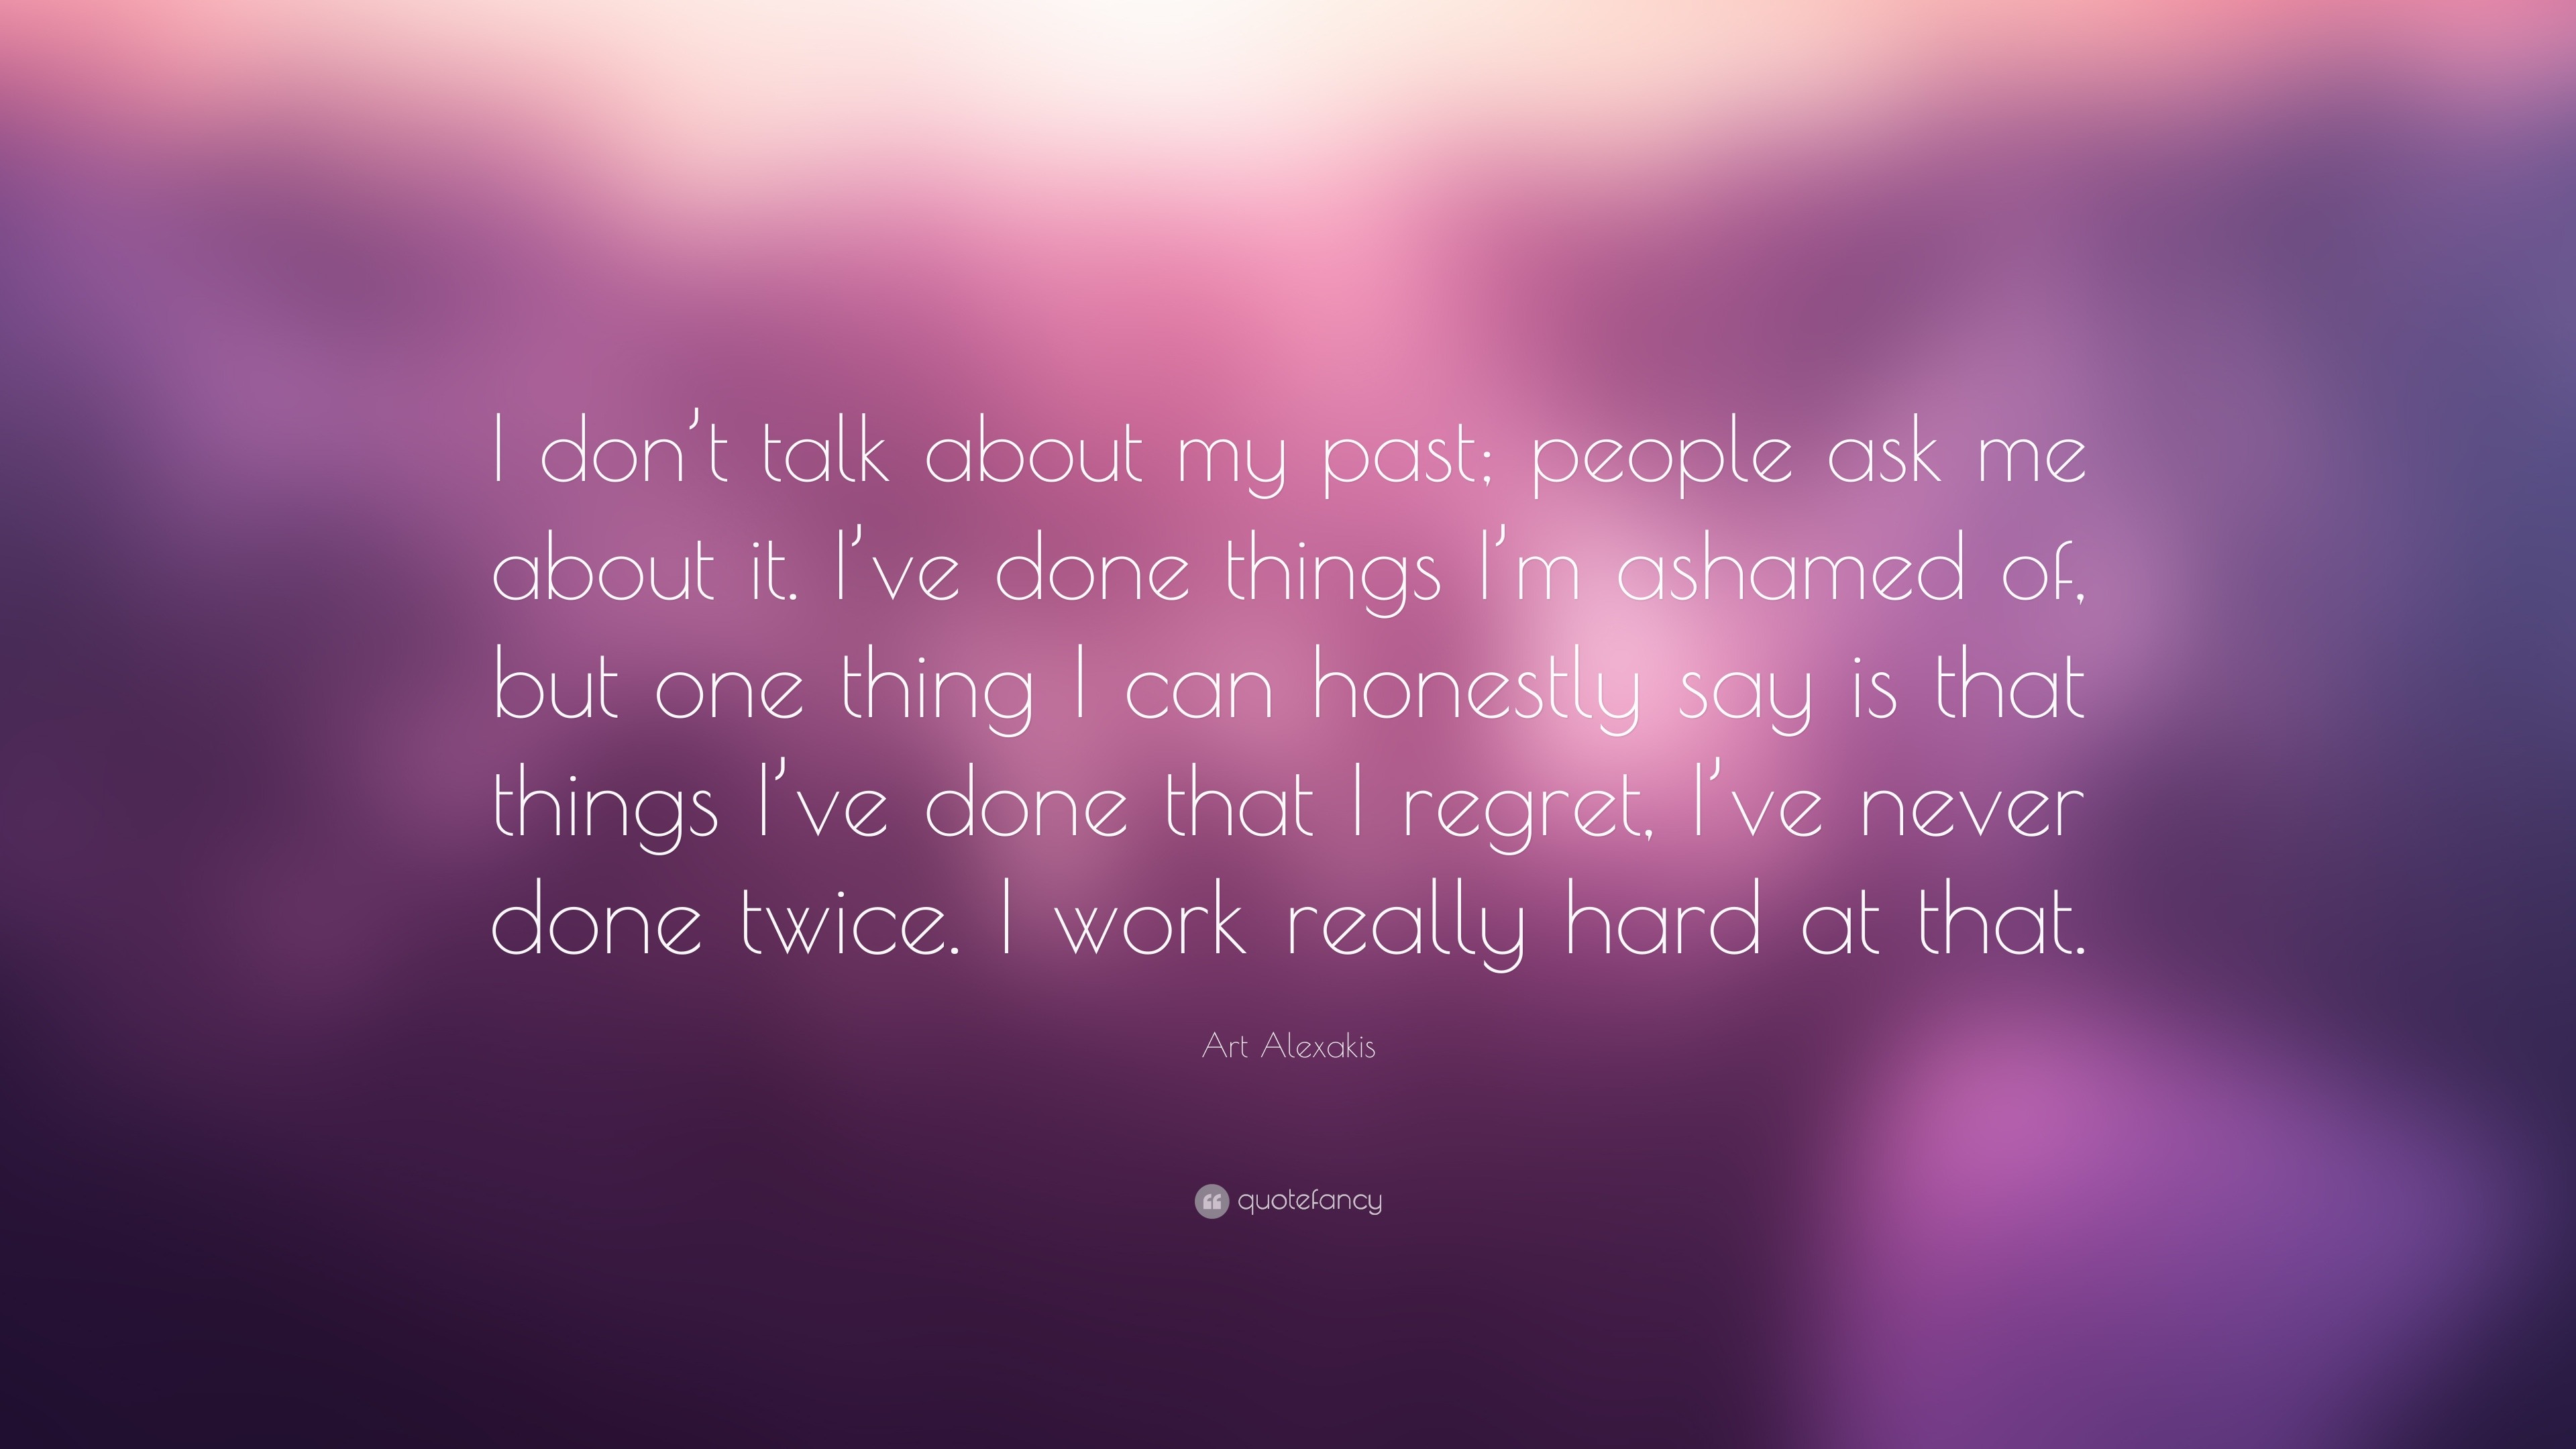 Art Alexakis Quote: “I don’t talk about my past; people ask me about it ...